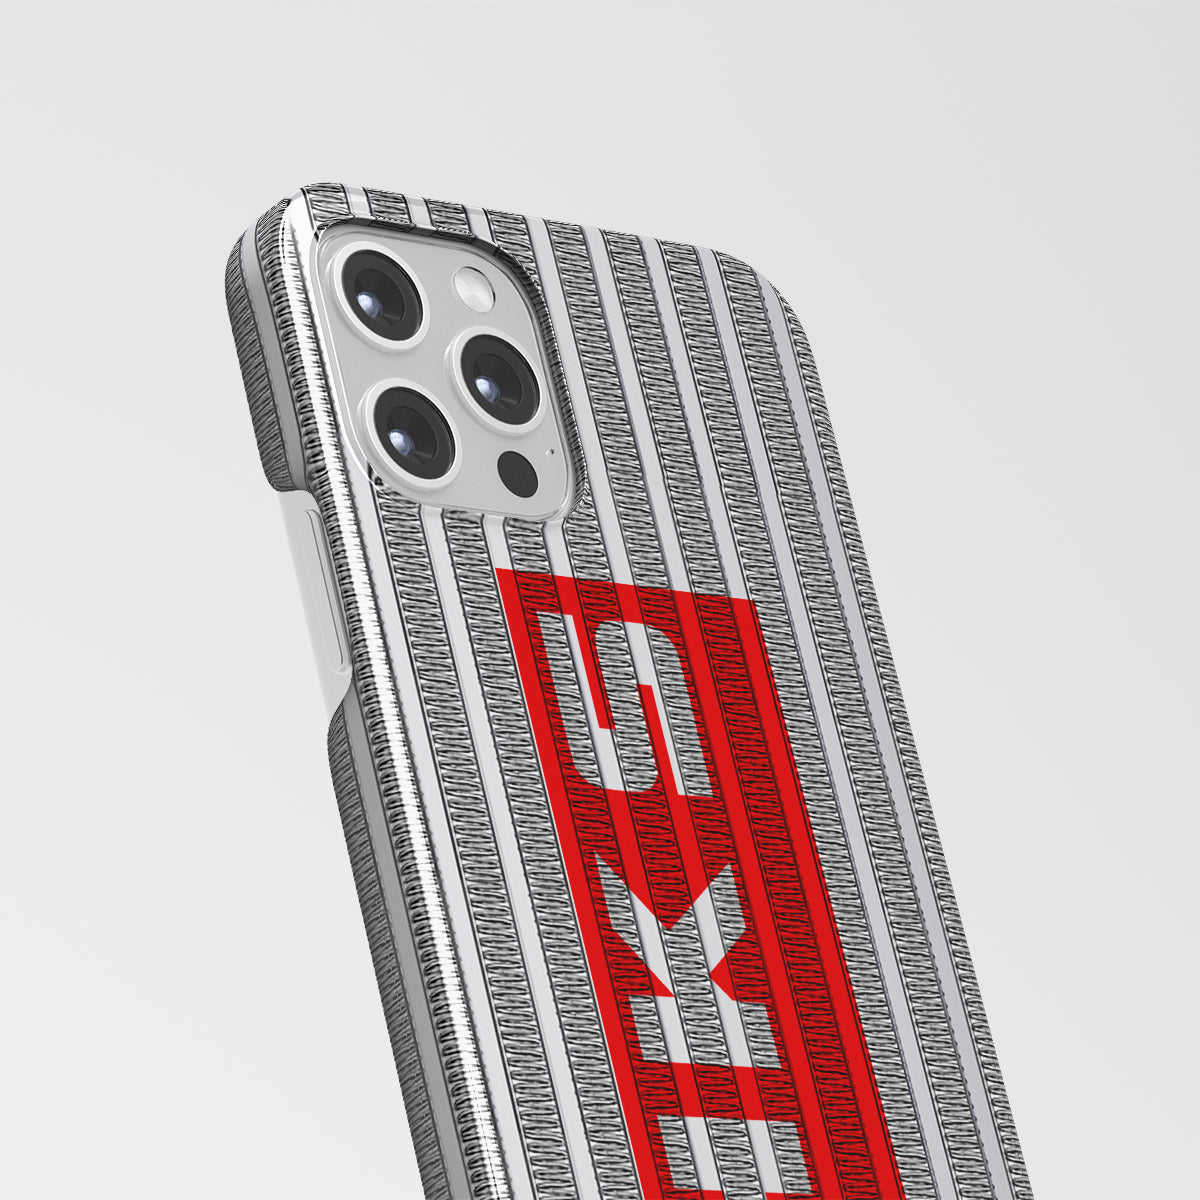 Some details of a silver and red HKS Aluminum phone case